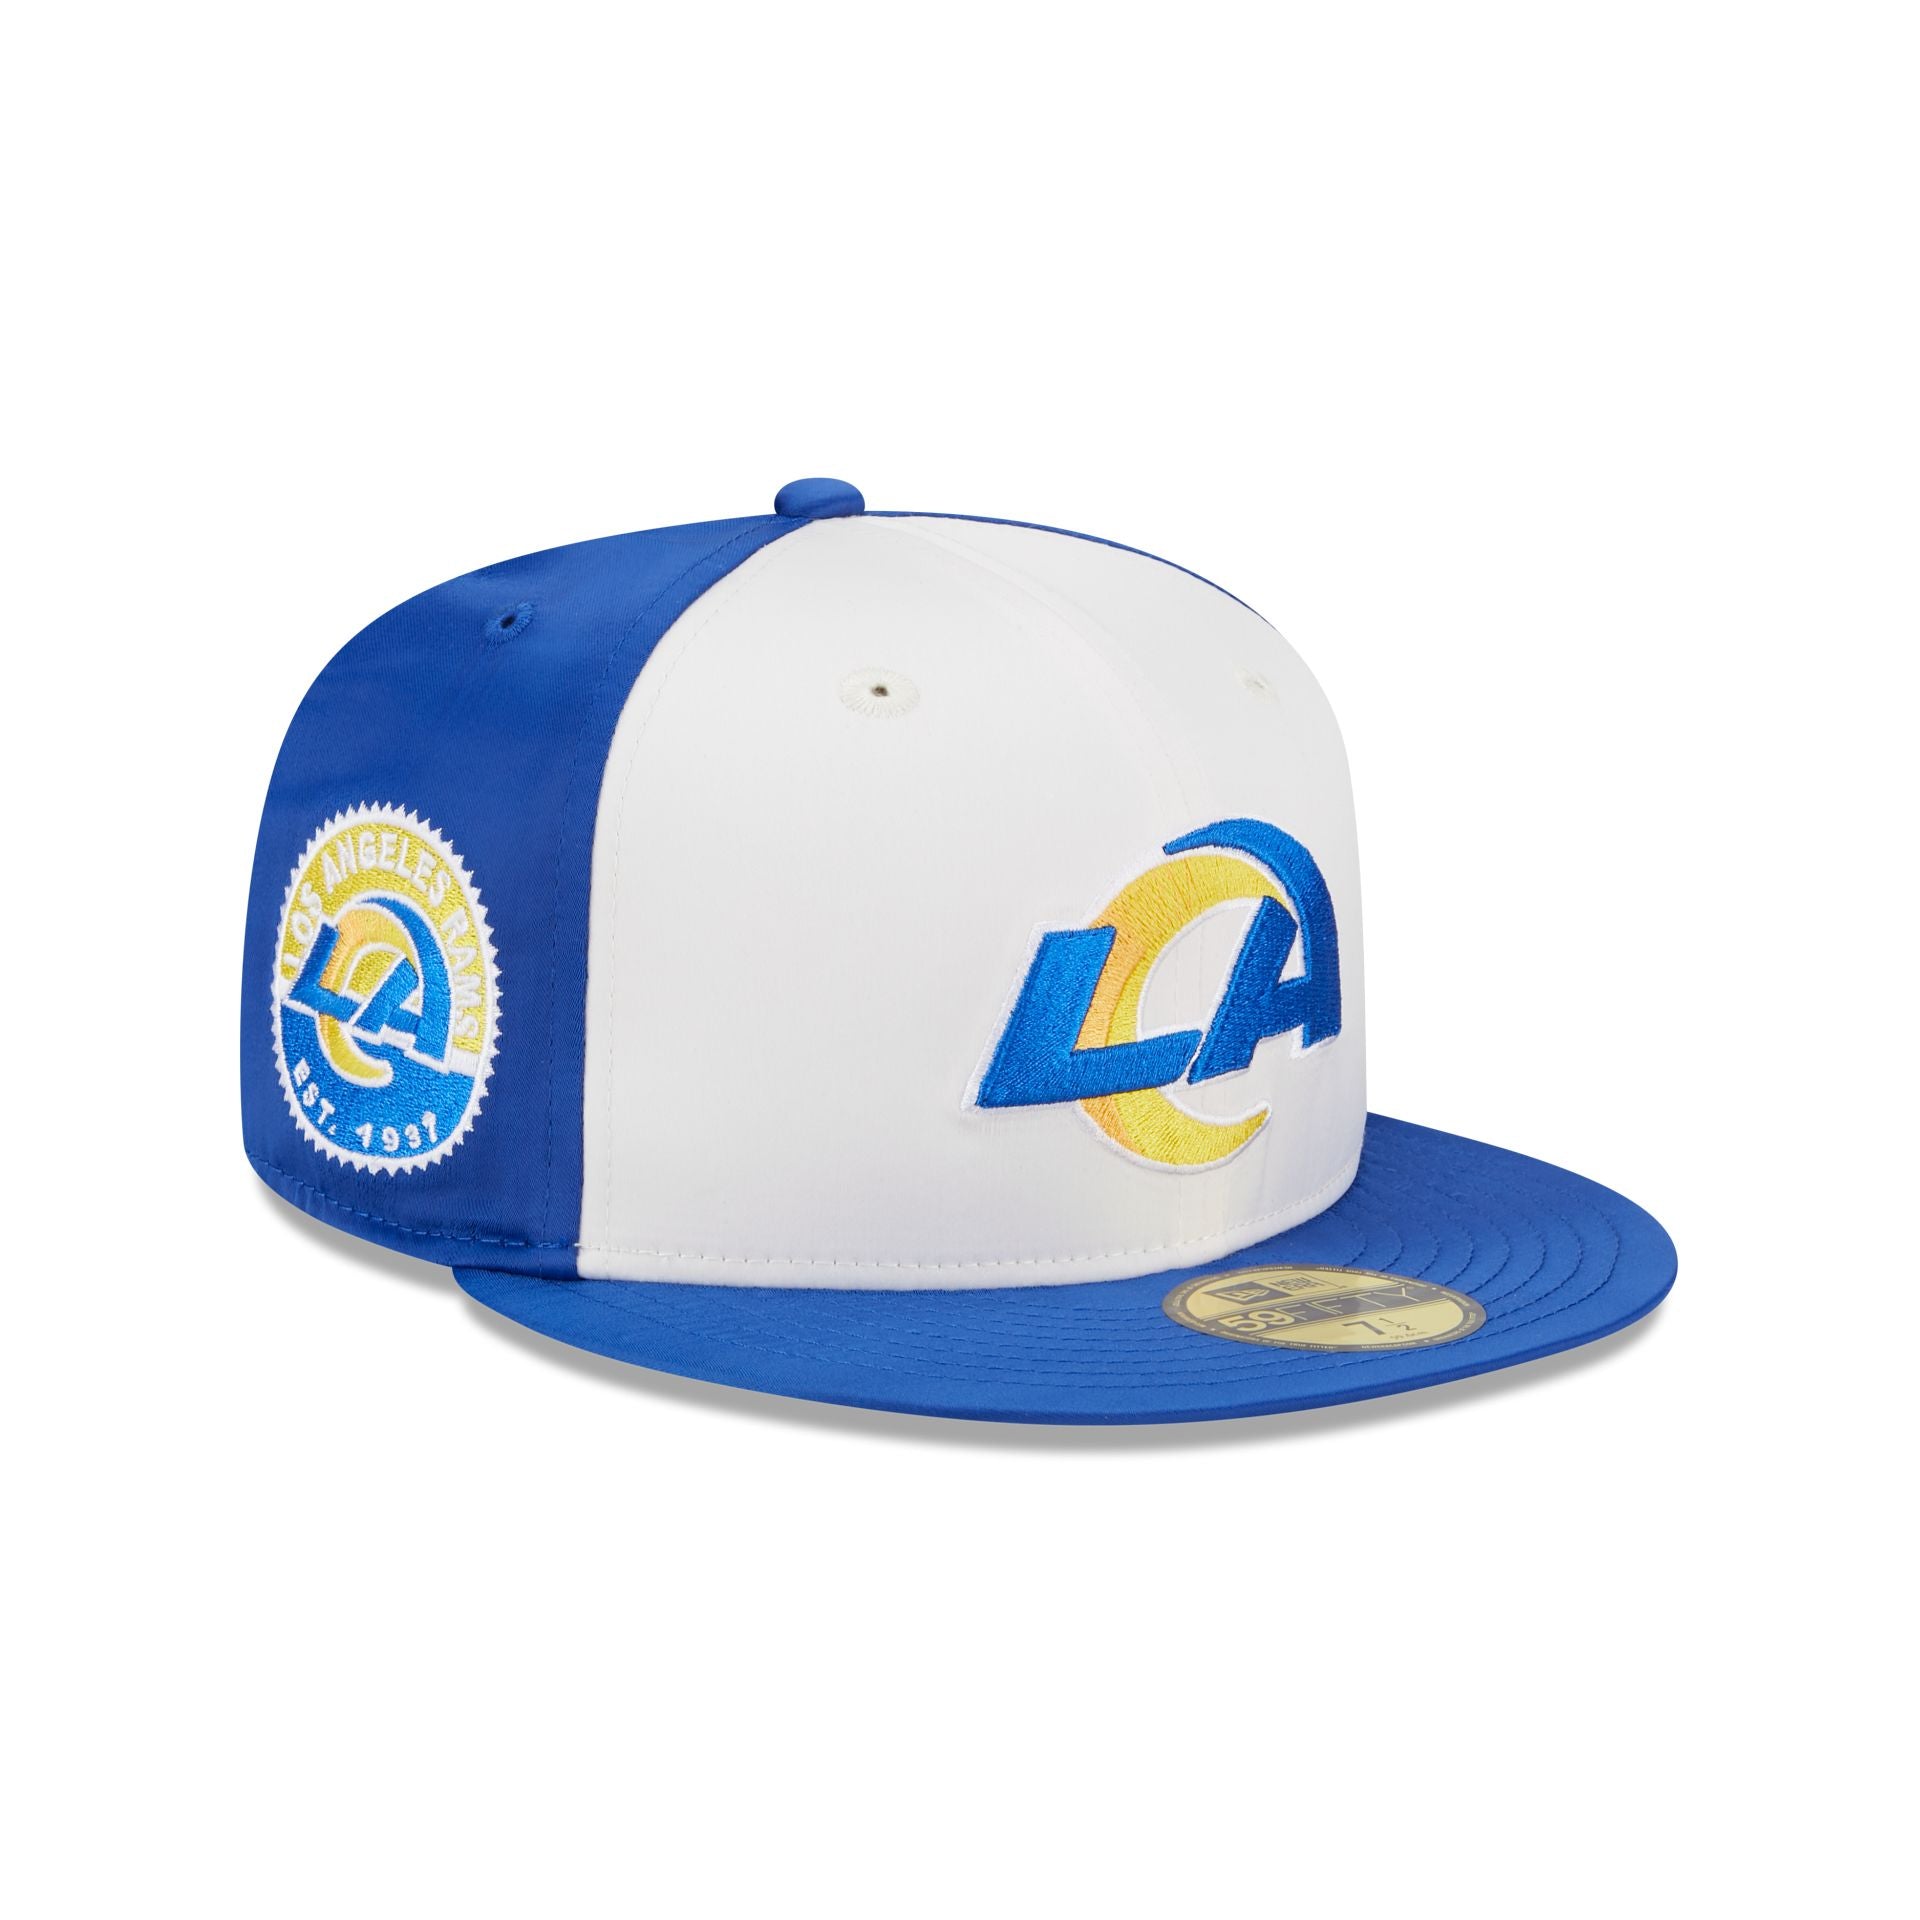 Los Angeles Rams Throwback Golfer Hat, Gray, by New Era